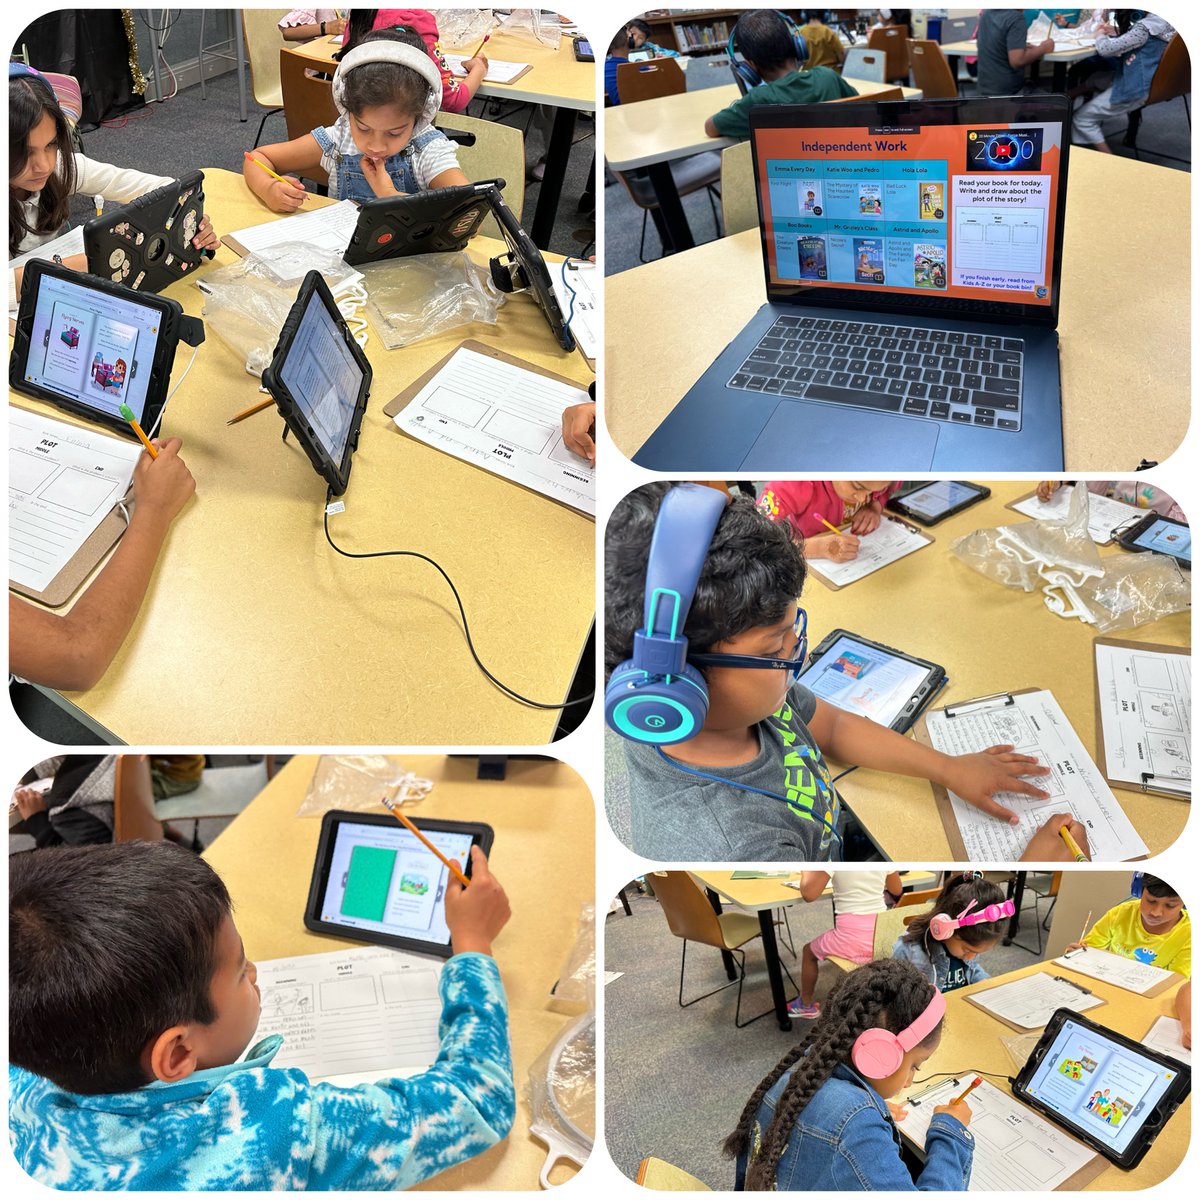 2nd Grade #vrestars are enjoying book clubs using @CapstonePub interactive multiuser series! So proud of these readers who are learning all nuances of book discussions! @VRE_STARS @MrsFontenotVRE @mskiedaisch @CISDLiteracy @CISDlib